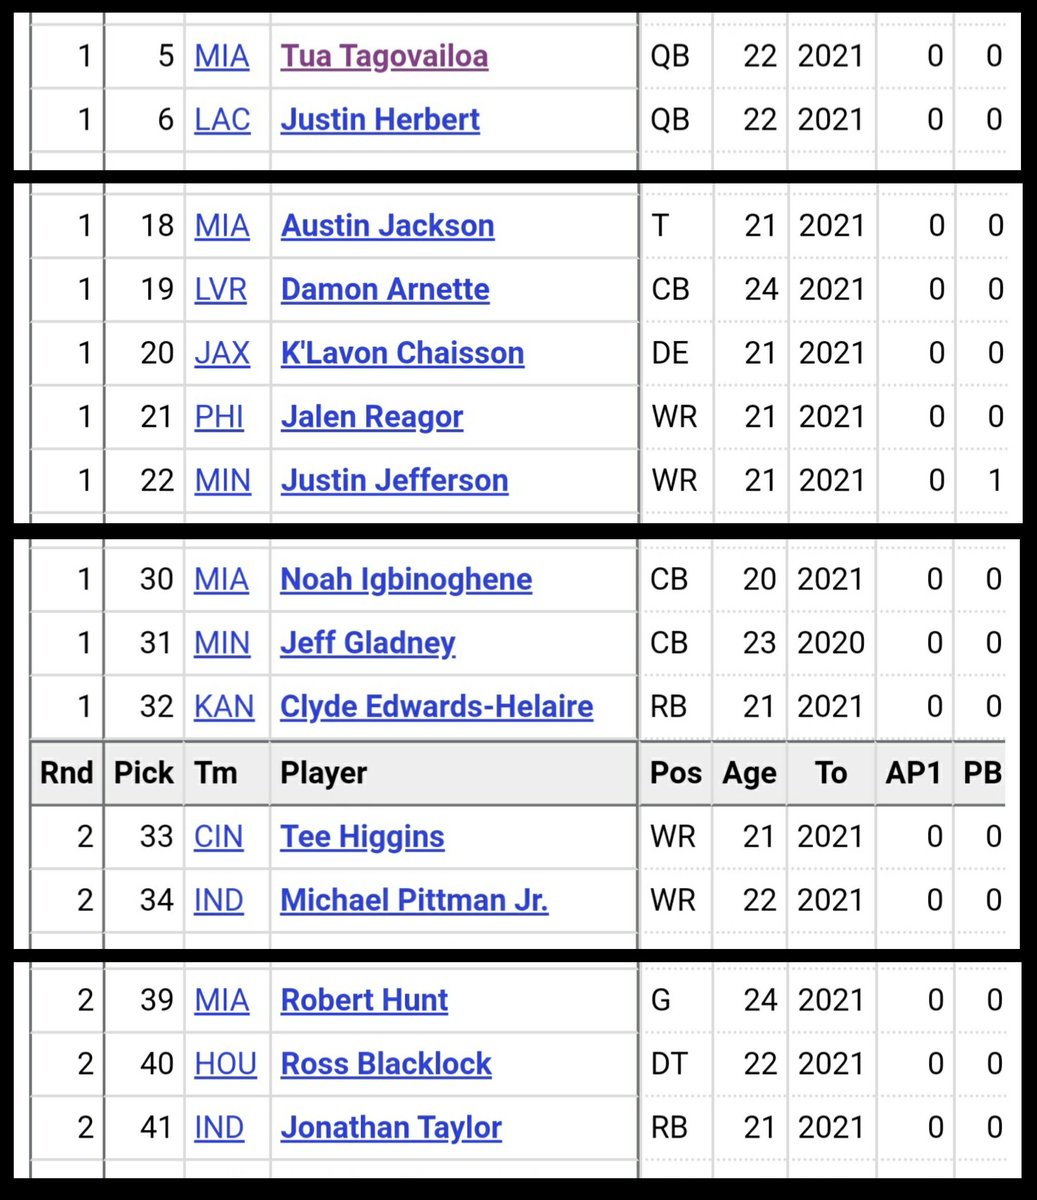 The Dolphins had 4 of the first 41 picks in the 2020 NFL Draft and missed on every pick while All-Pro/franchise changing talent was taken just after each. (This doesn't even include D'Andre Swift at 35 overall)

The Curse of Tequesta is realer than real https://t.co/MPaG1KlBqv https://t.co/Jq68ShpDyj